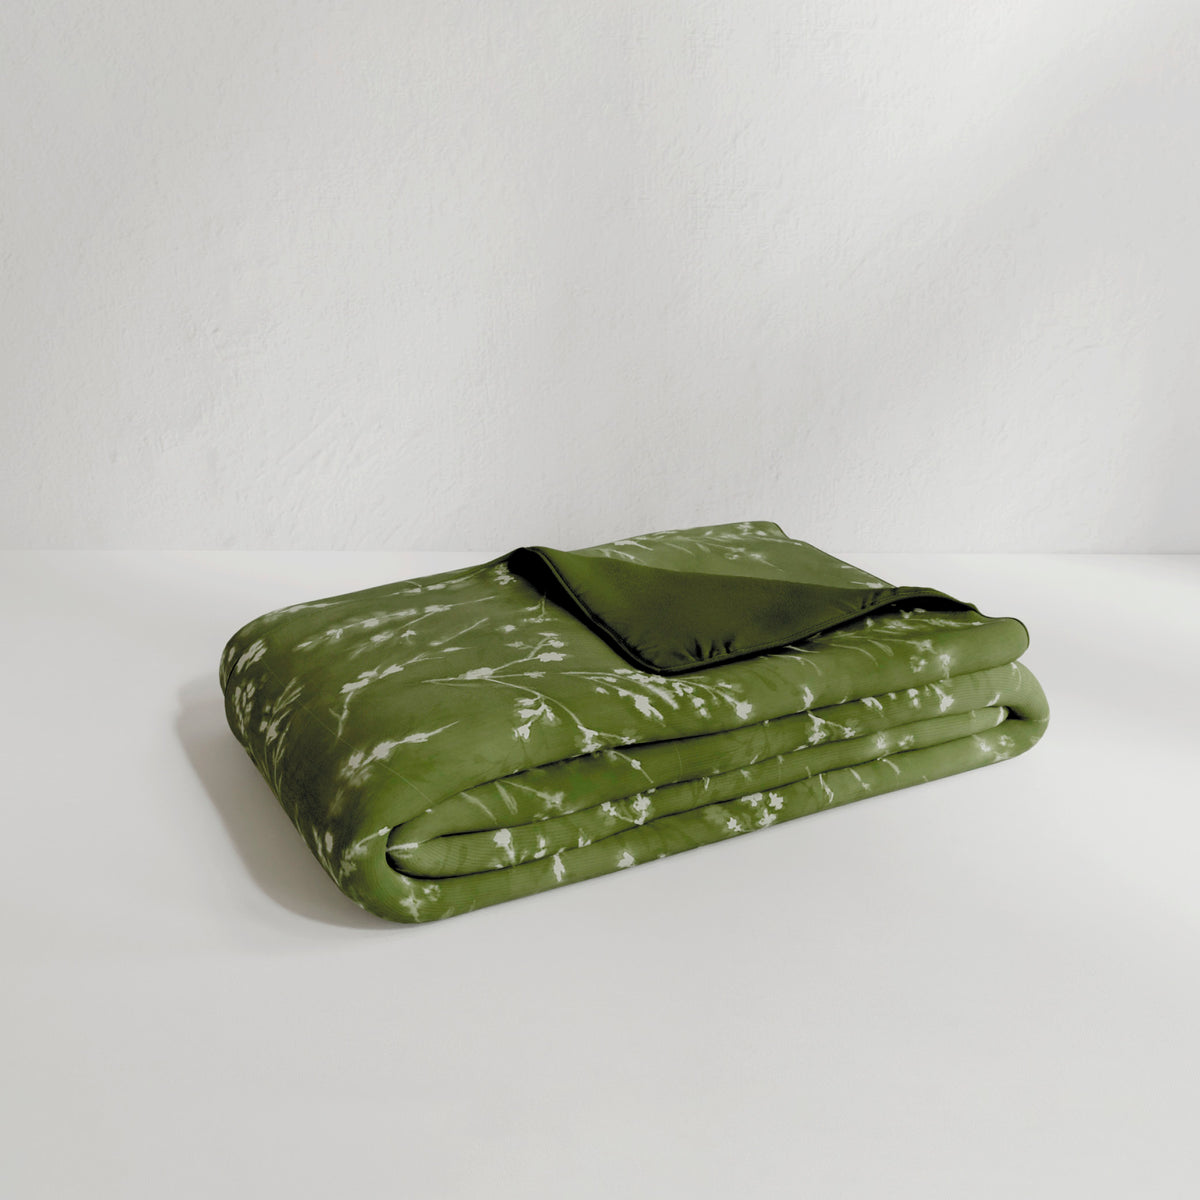 Image of the Floral Evergreen Duvet Cover + Cooling neatly folded with the floral side facing up and the back right corner folded over to show the reversible plain Evergreen side